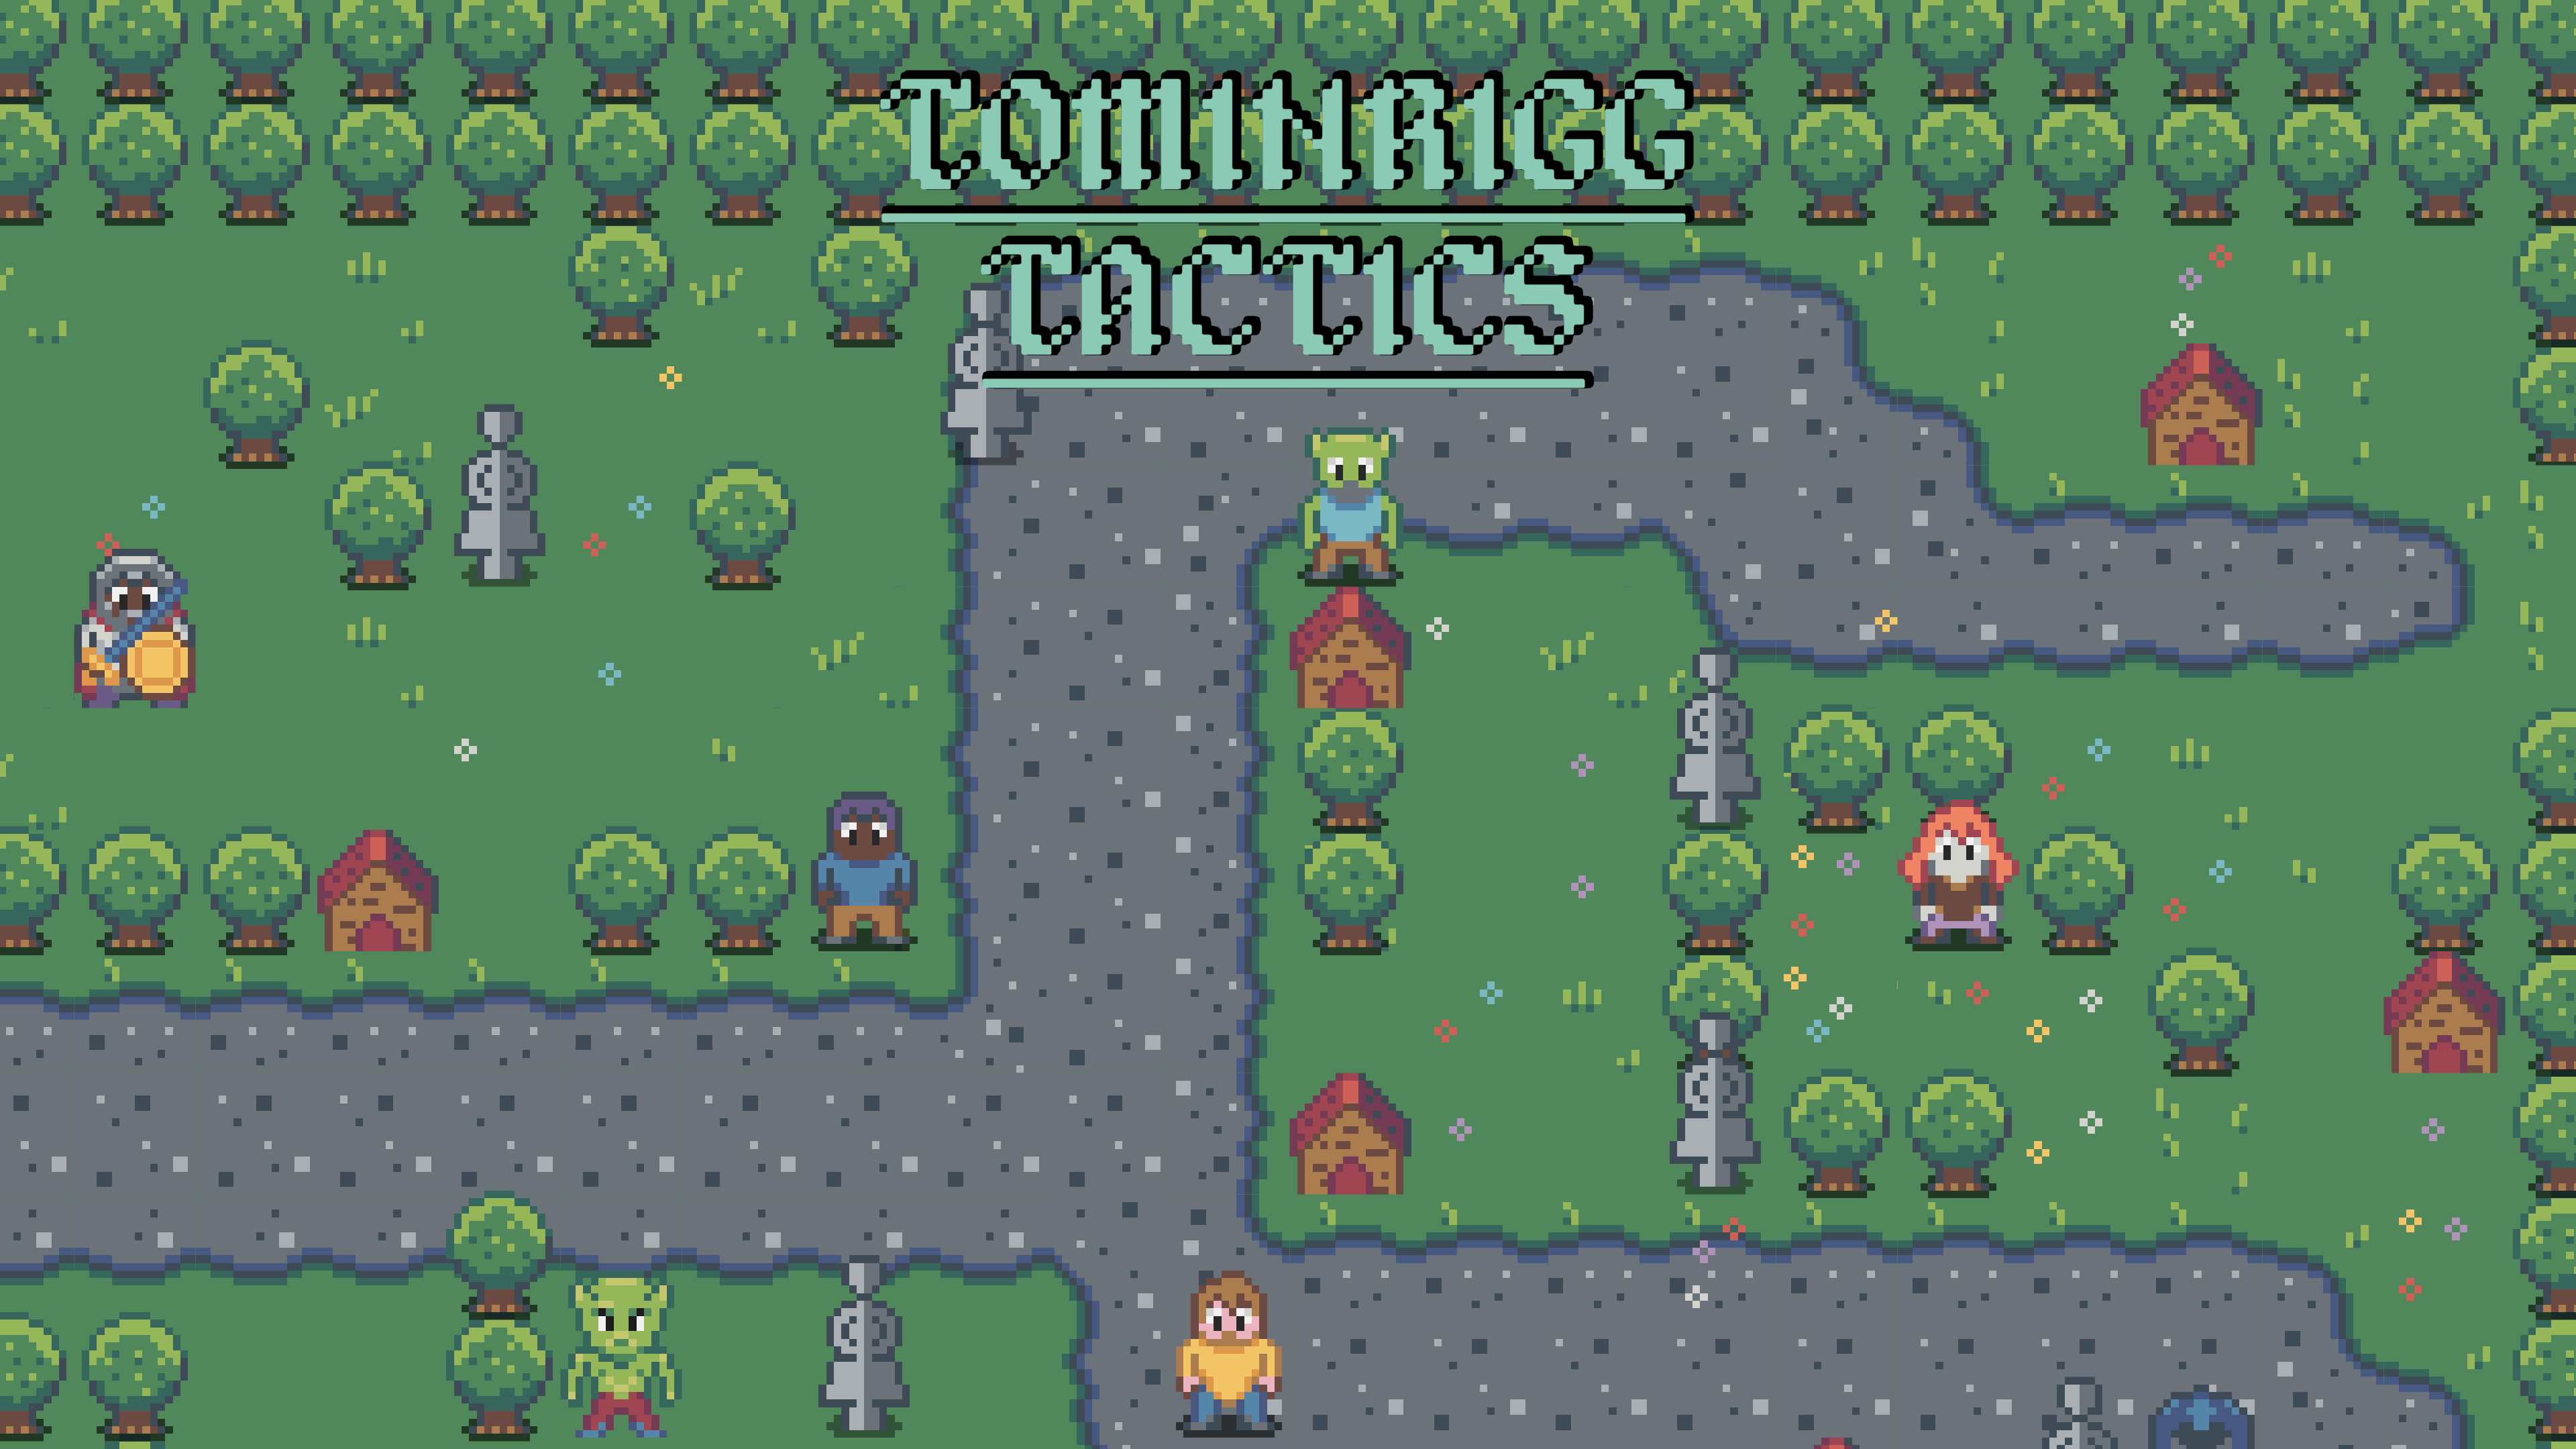 A screenshot of the game. The game has a pixel art style and you can see trees, houses, and some villagers and monsters.